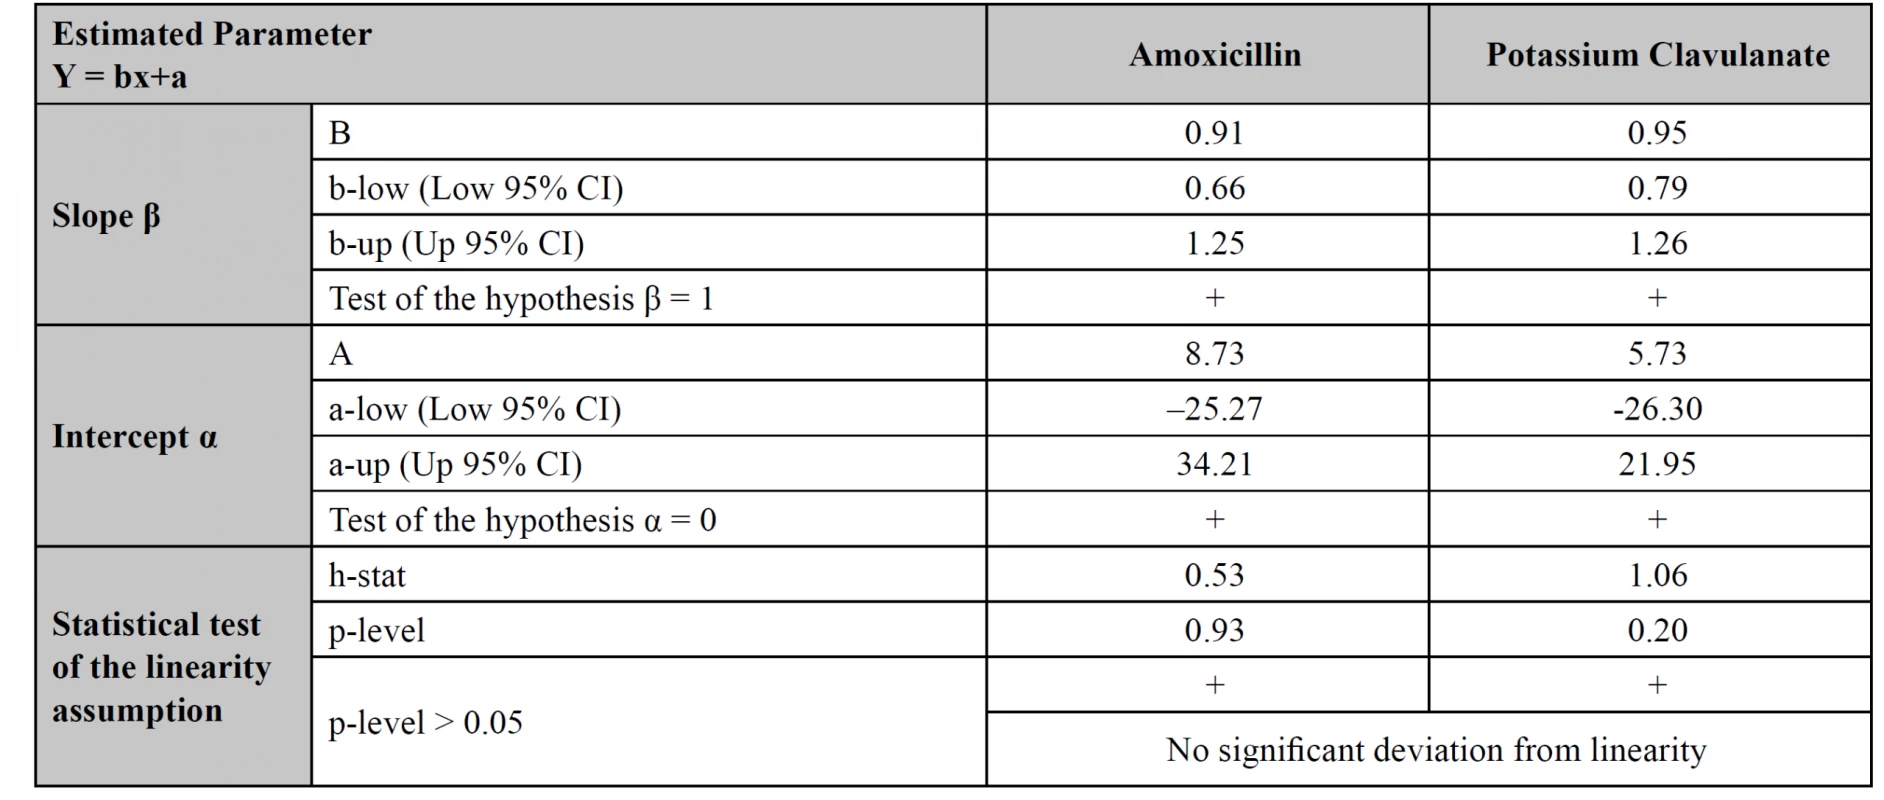 Testing the equality of measurements from HPLC and UPLC methods for simultaneous assay of amoxicillin and
potassium clavulanate